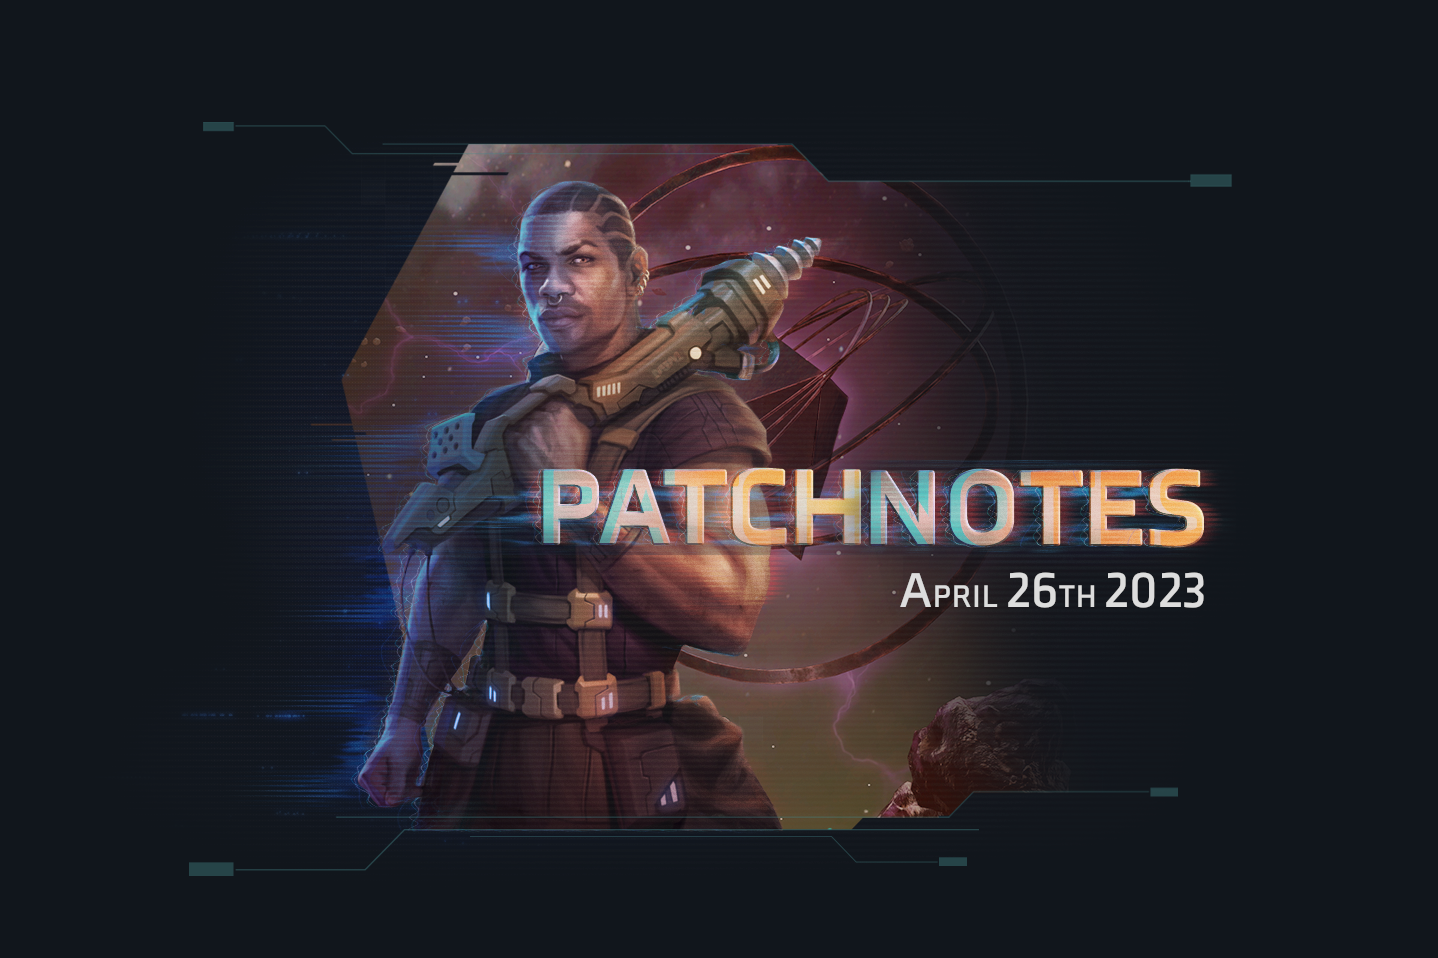 Starborne: Frontiers - Patch Notes April 26th 2023